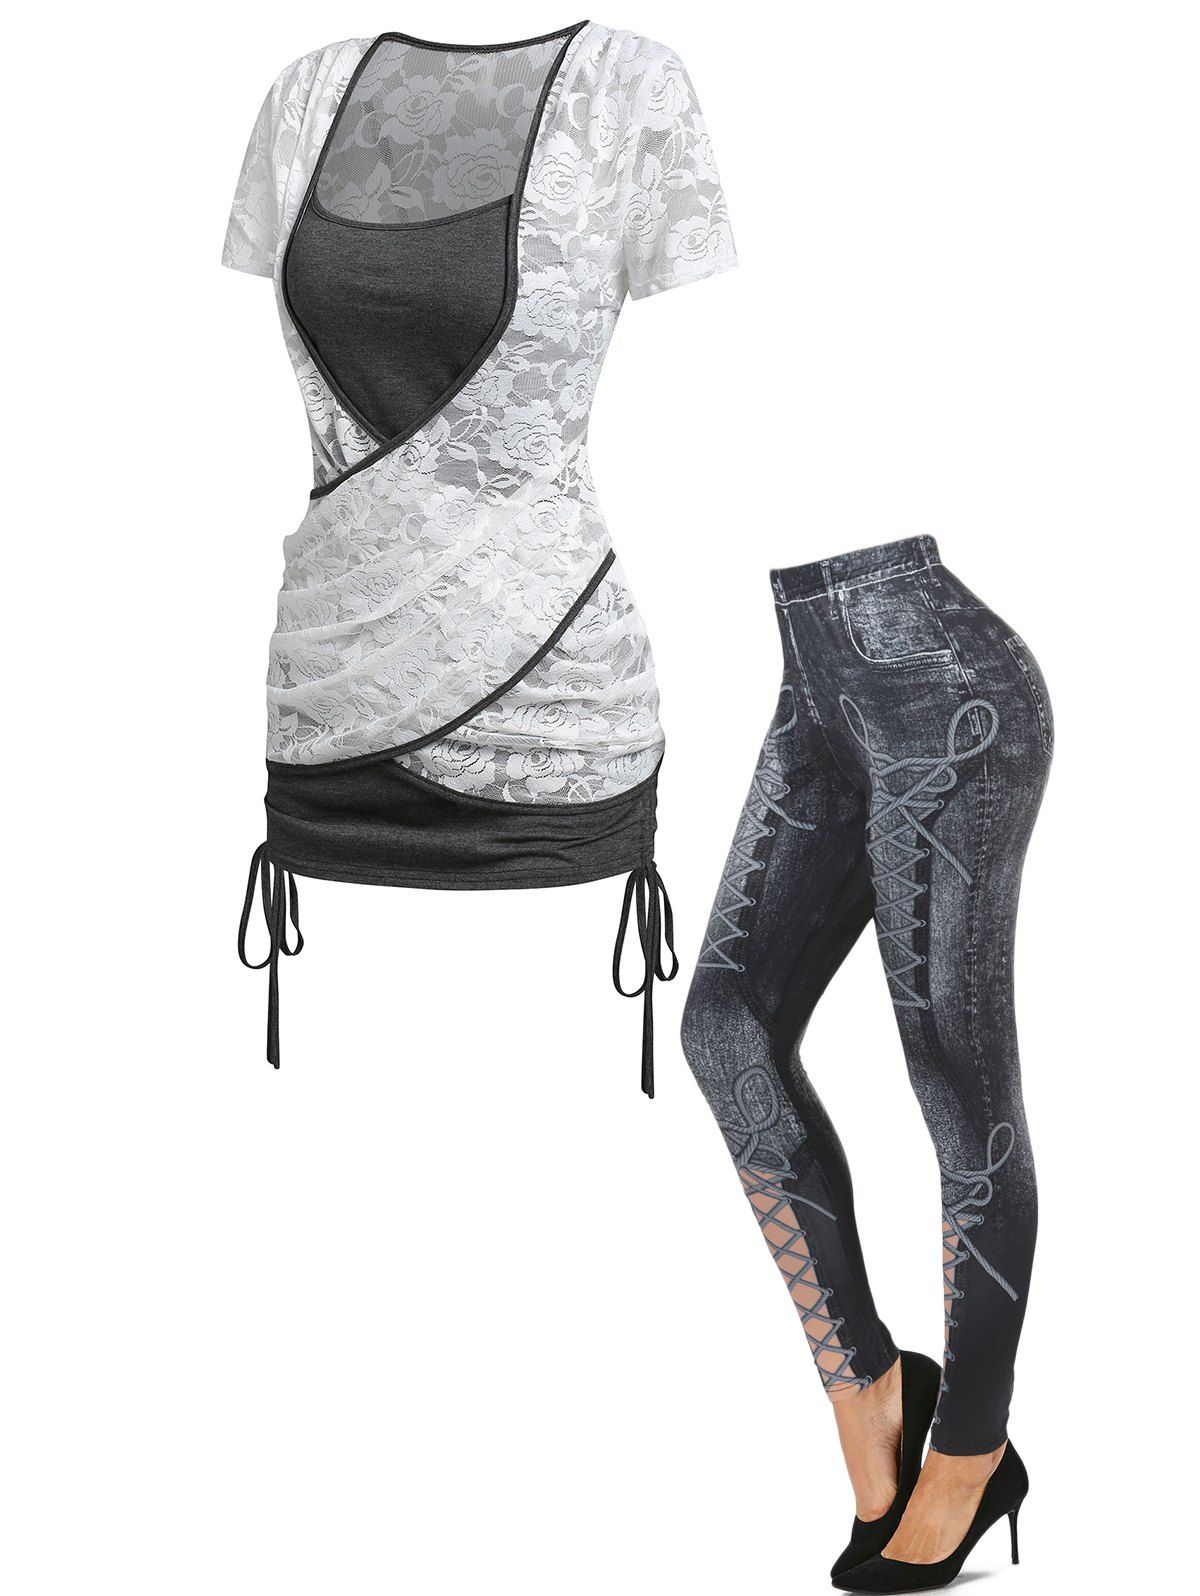 Flowered Lace Crossover Cinched Cami Tops Two Piece Set And High Waisted Lace-up 3D Print Skinny Jeggings Outfit - GRAY S